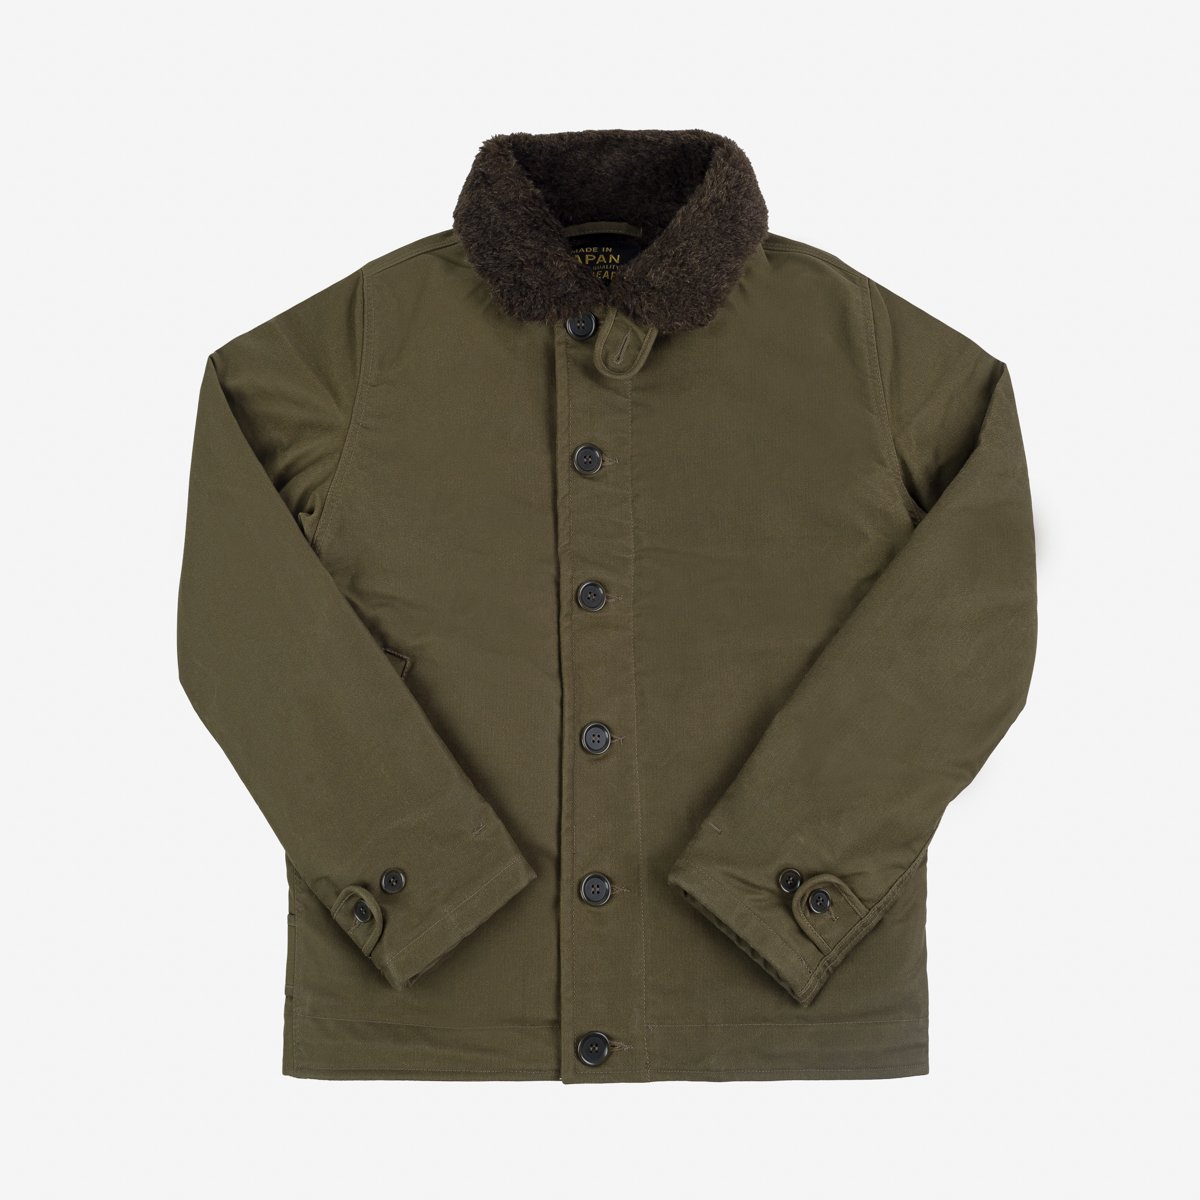 Iron Heart - IHM-37 Deck Jacket - Oiled Whipcord Olive